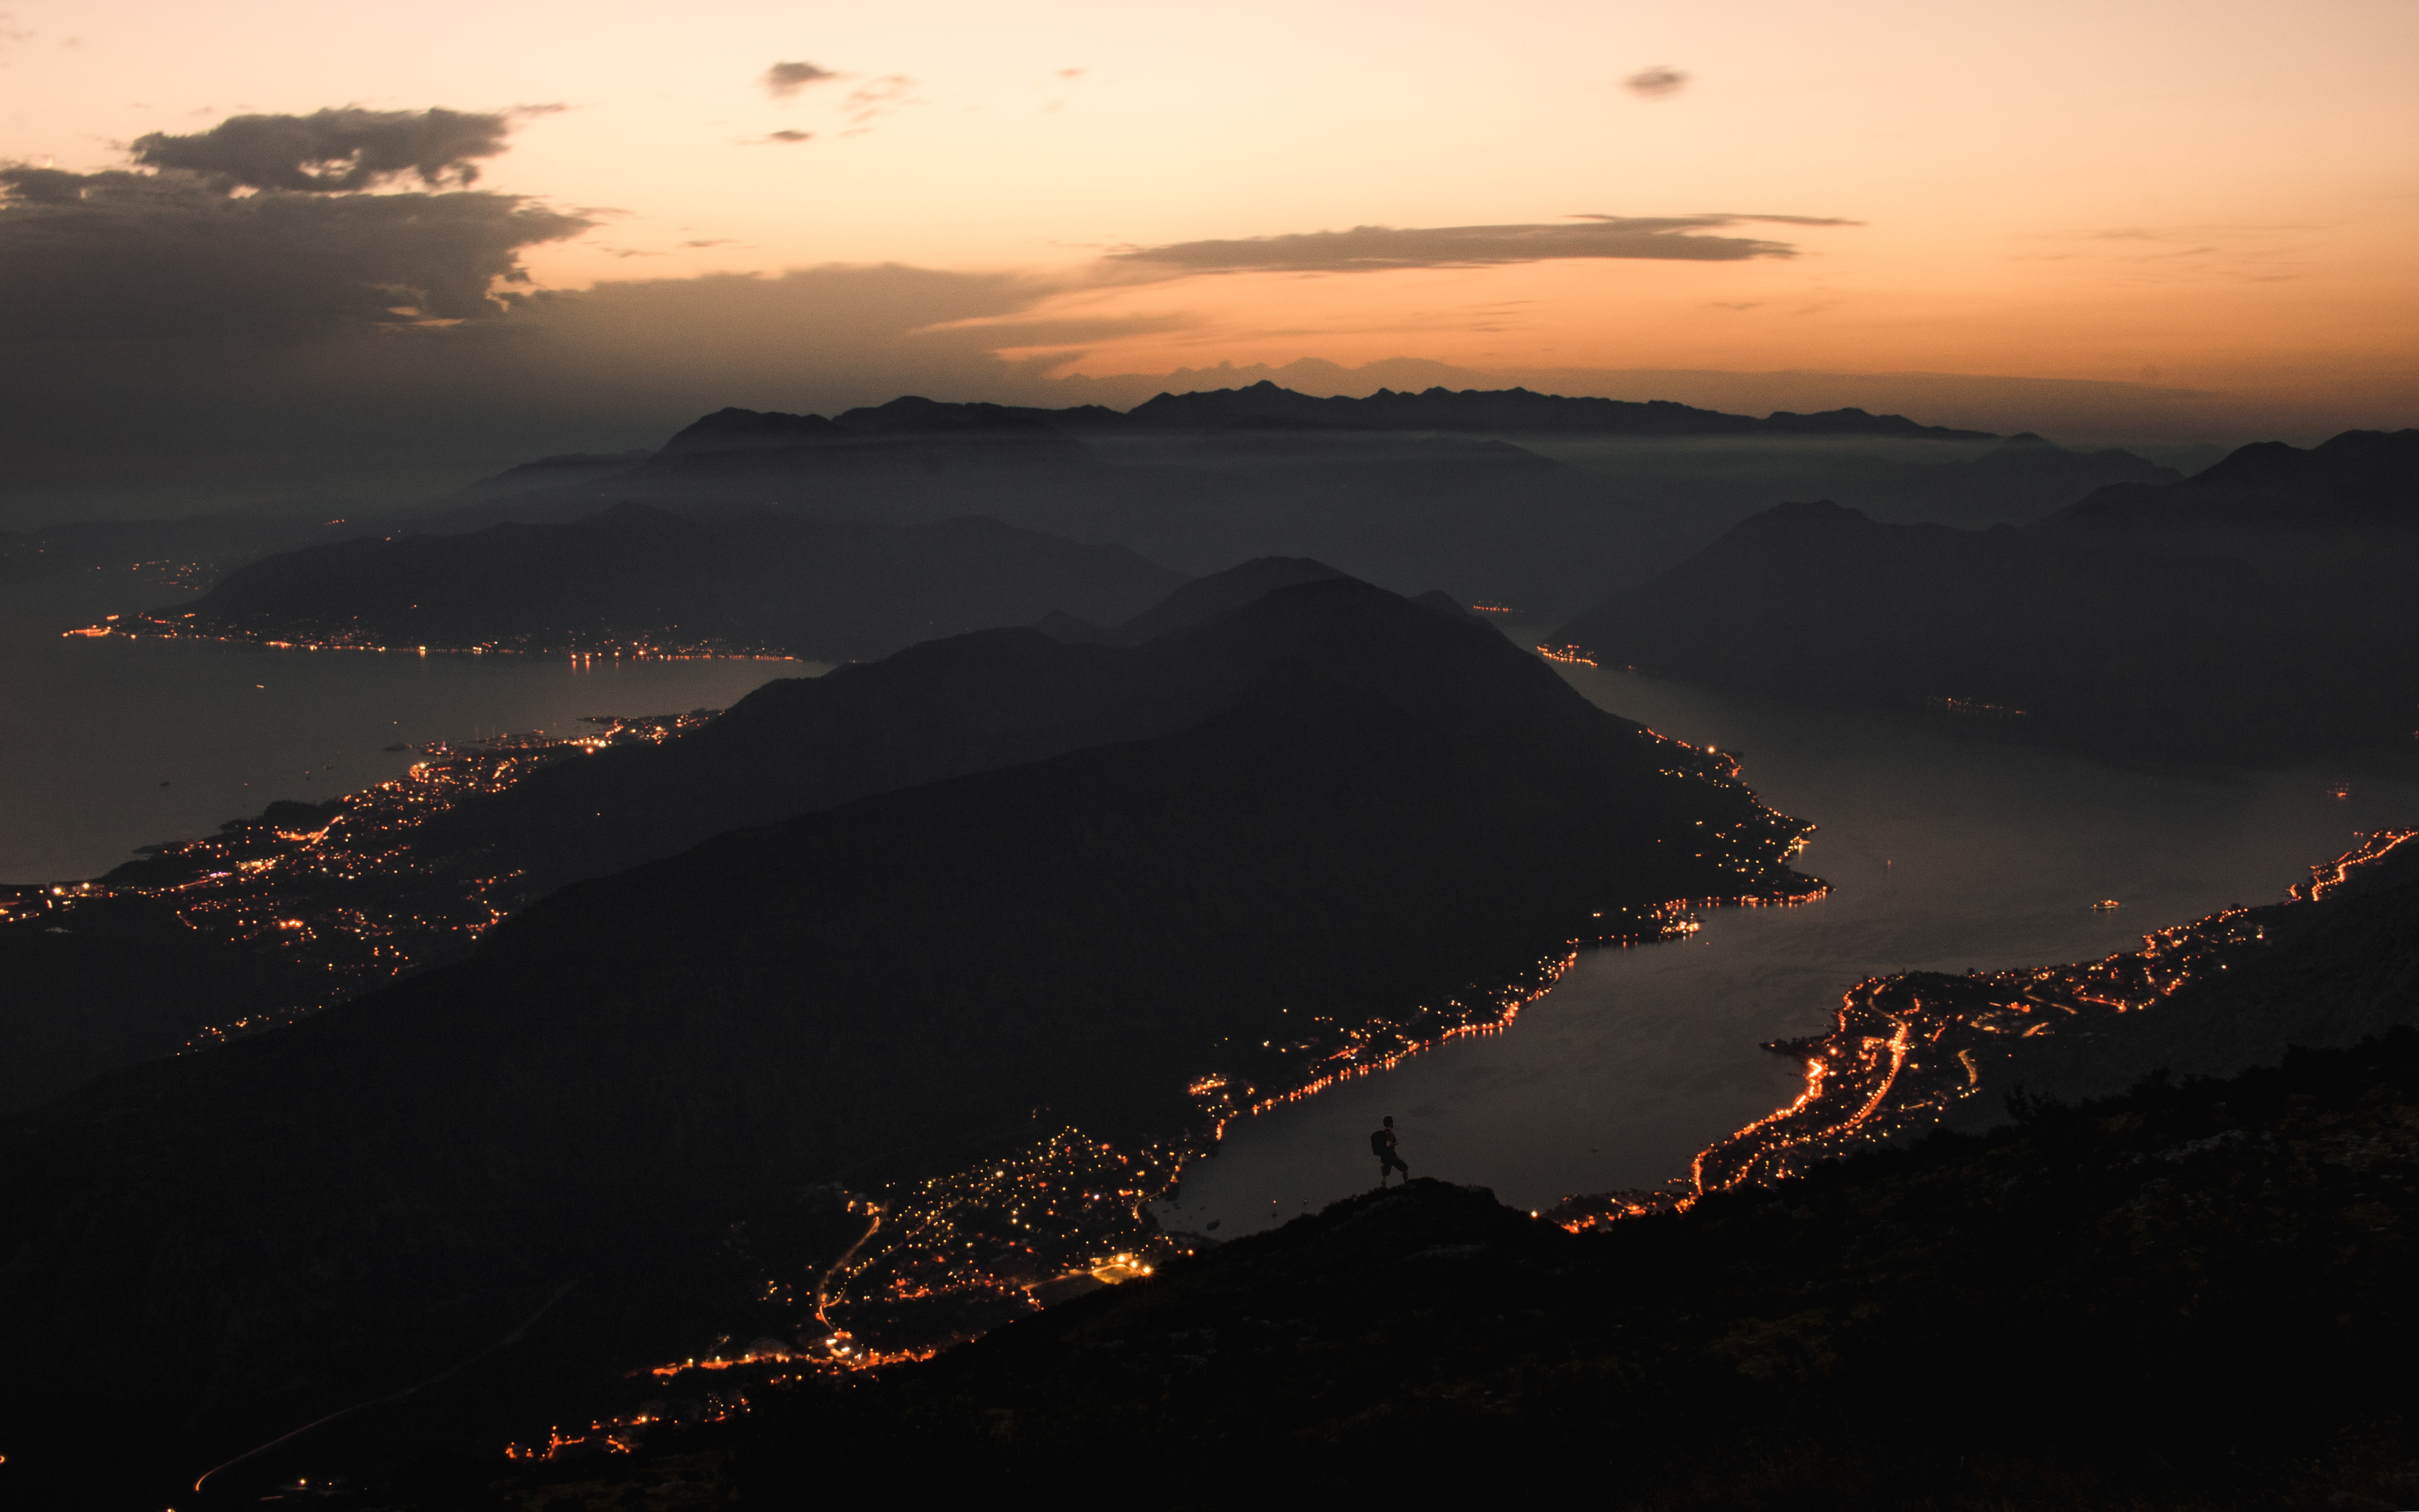 lights, dark, night, mountains, coast, city, view from above